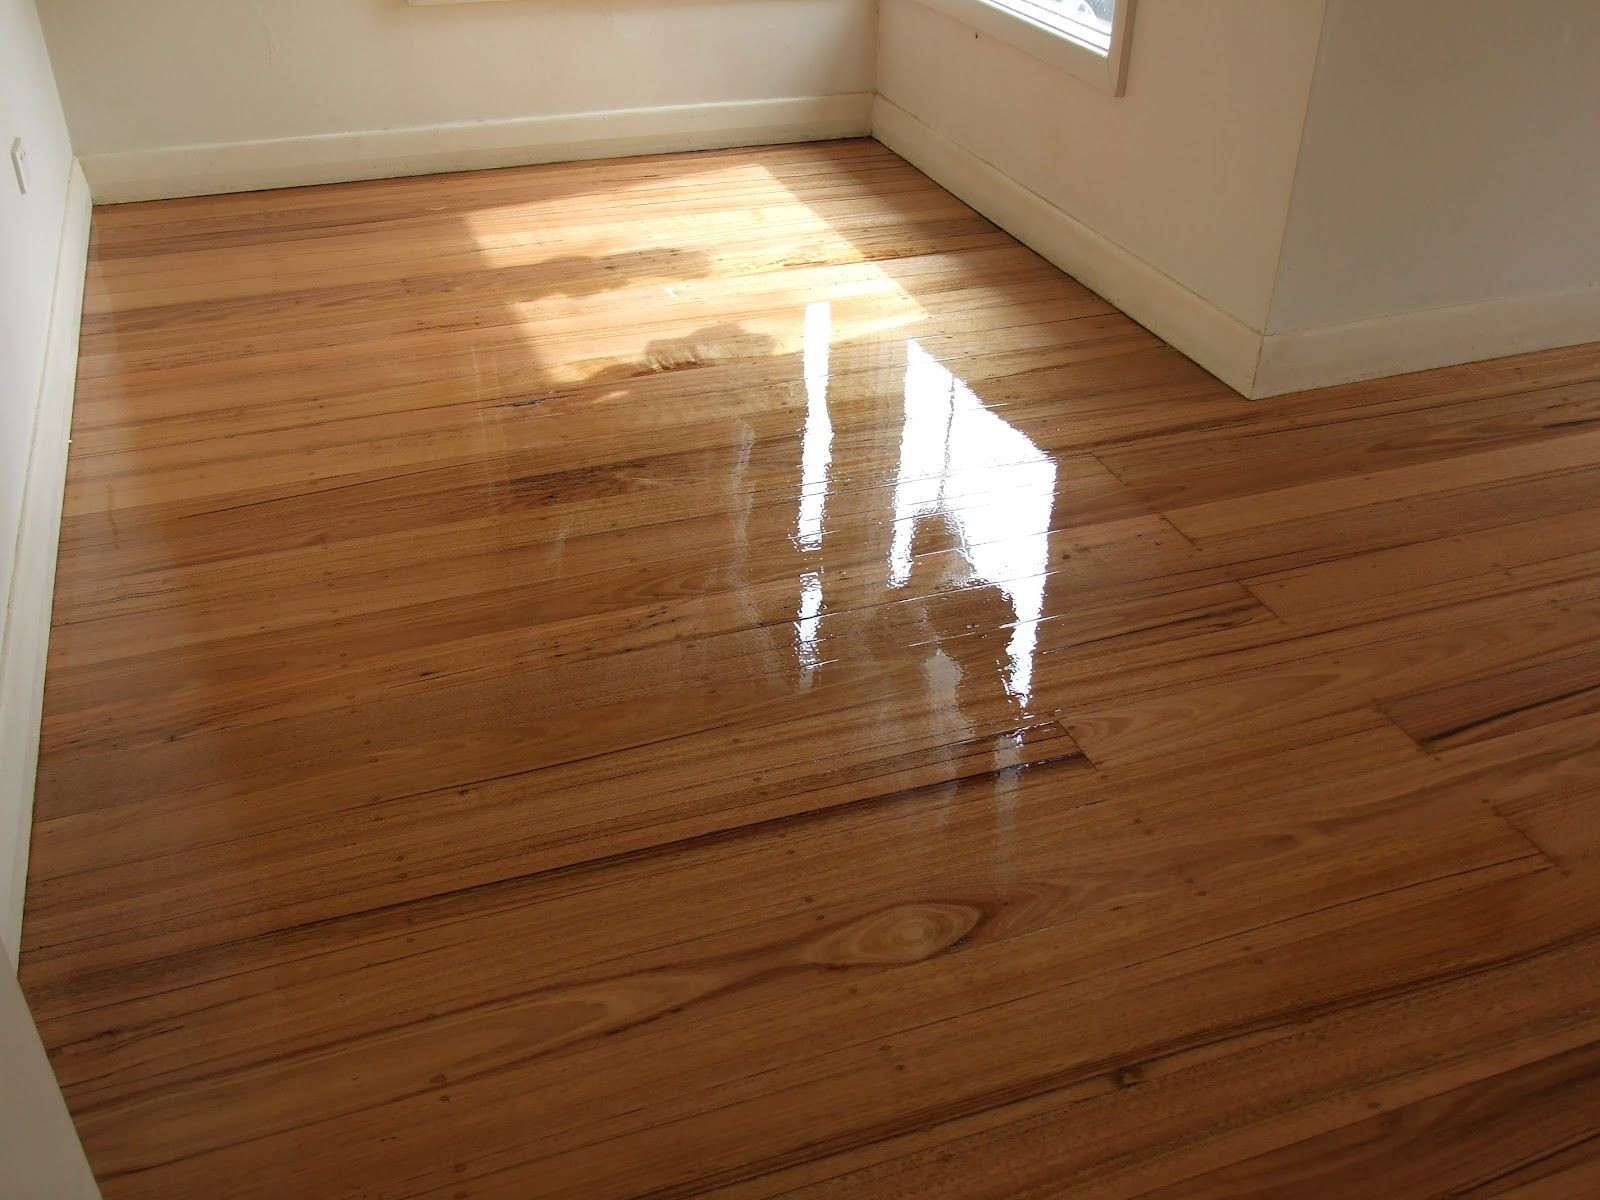 25 Lovable Hardwood Floor Refinishing Materials 2024 free download hardwood floor refinishing materials of pro tects finished floor guard is quickly becoming one of the most for pro tects finished floor guard is quickly becoming one of the most popular floo